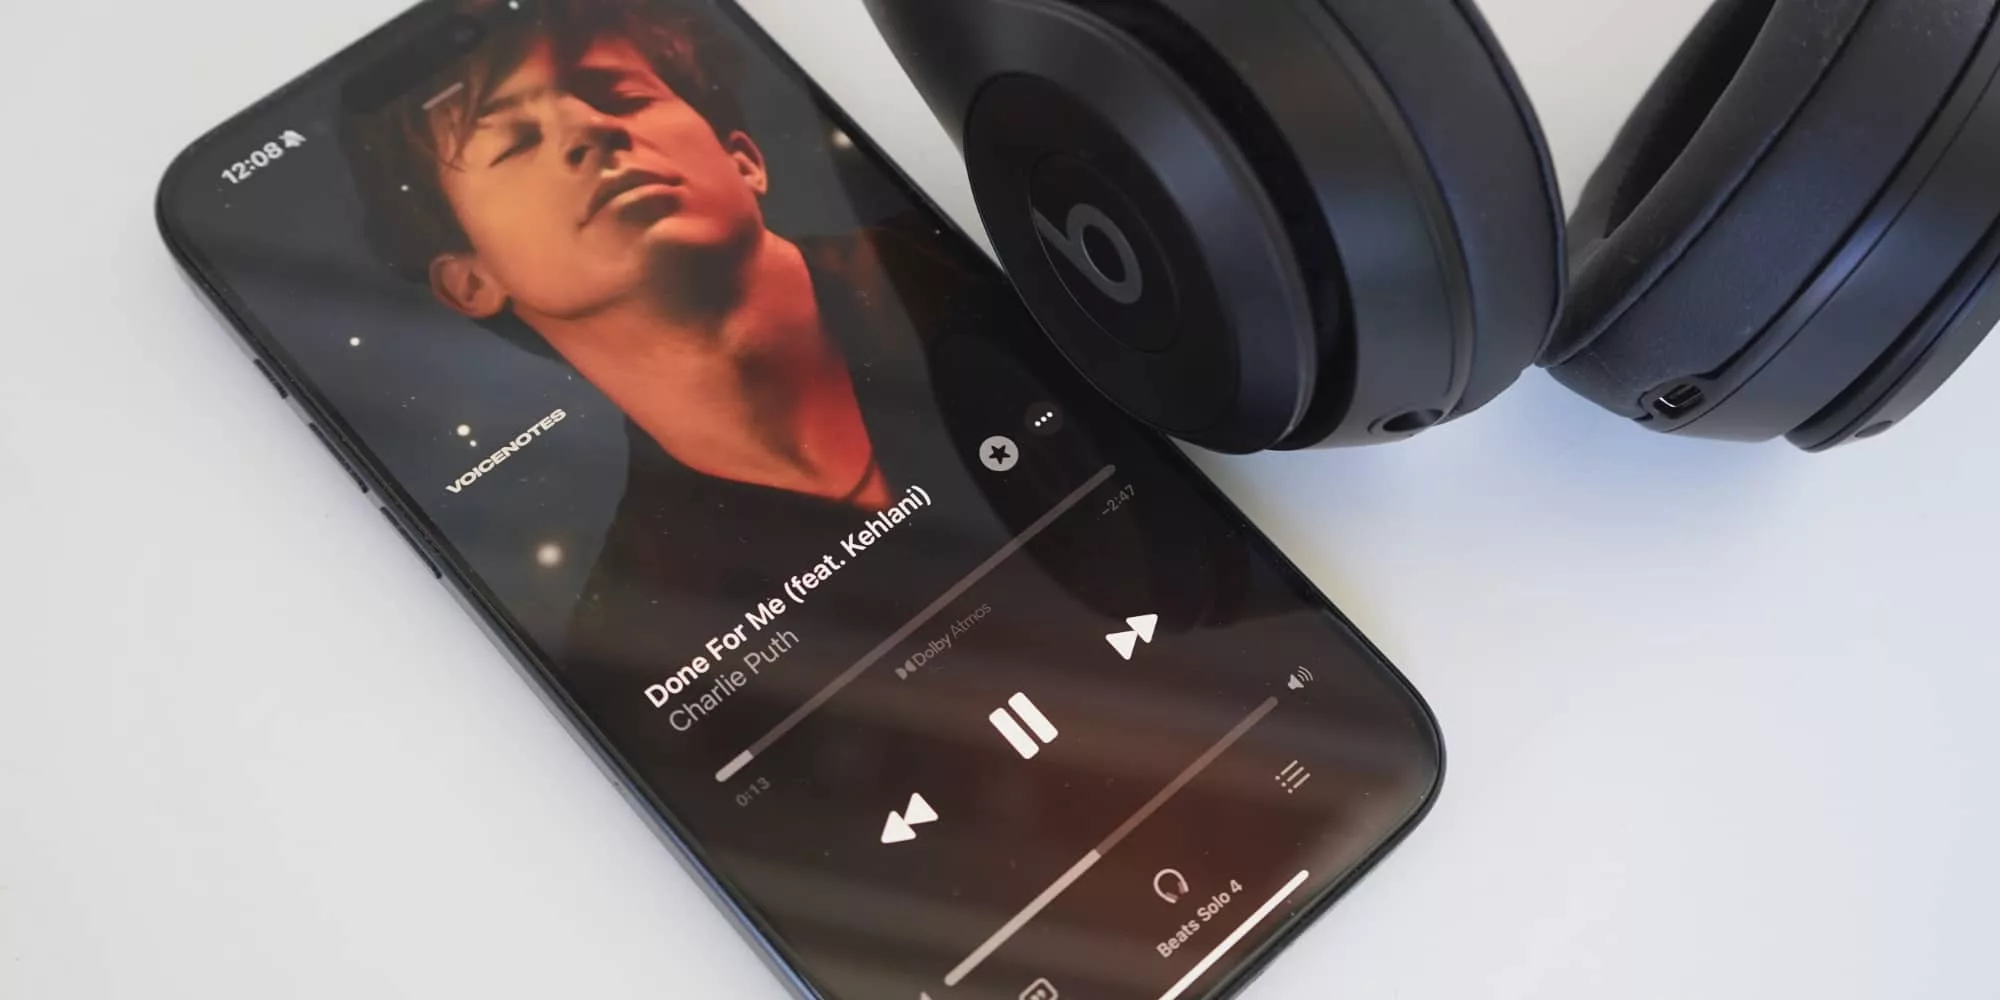 The Beats Solo 4 support Dolby Atmos tracks from Apple Music, evident in this image with the Dolby Atmos logo shown.